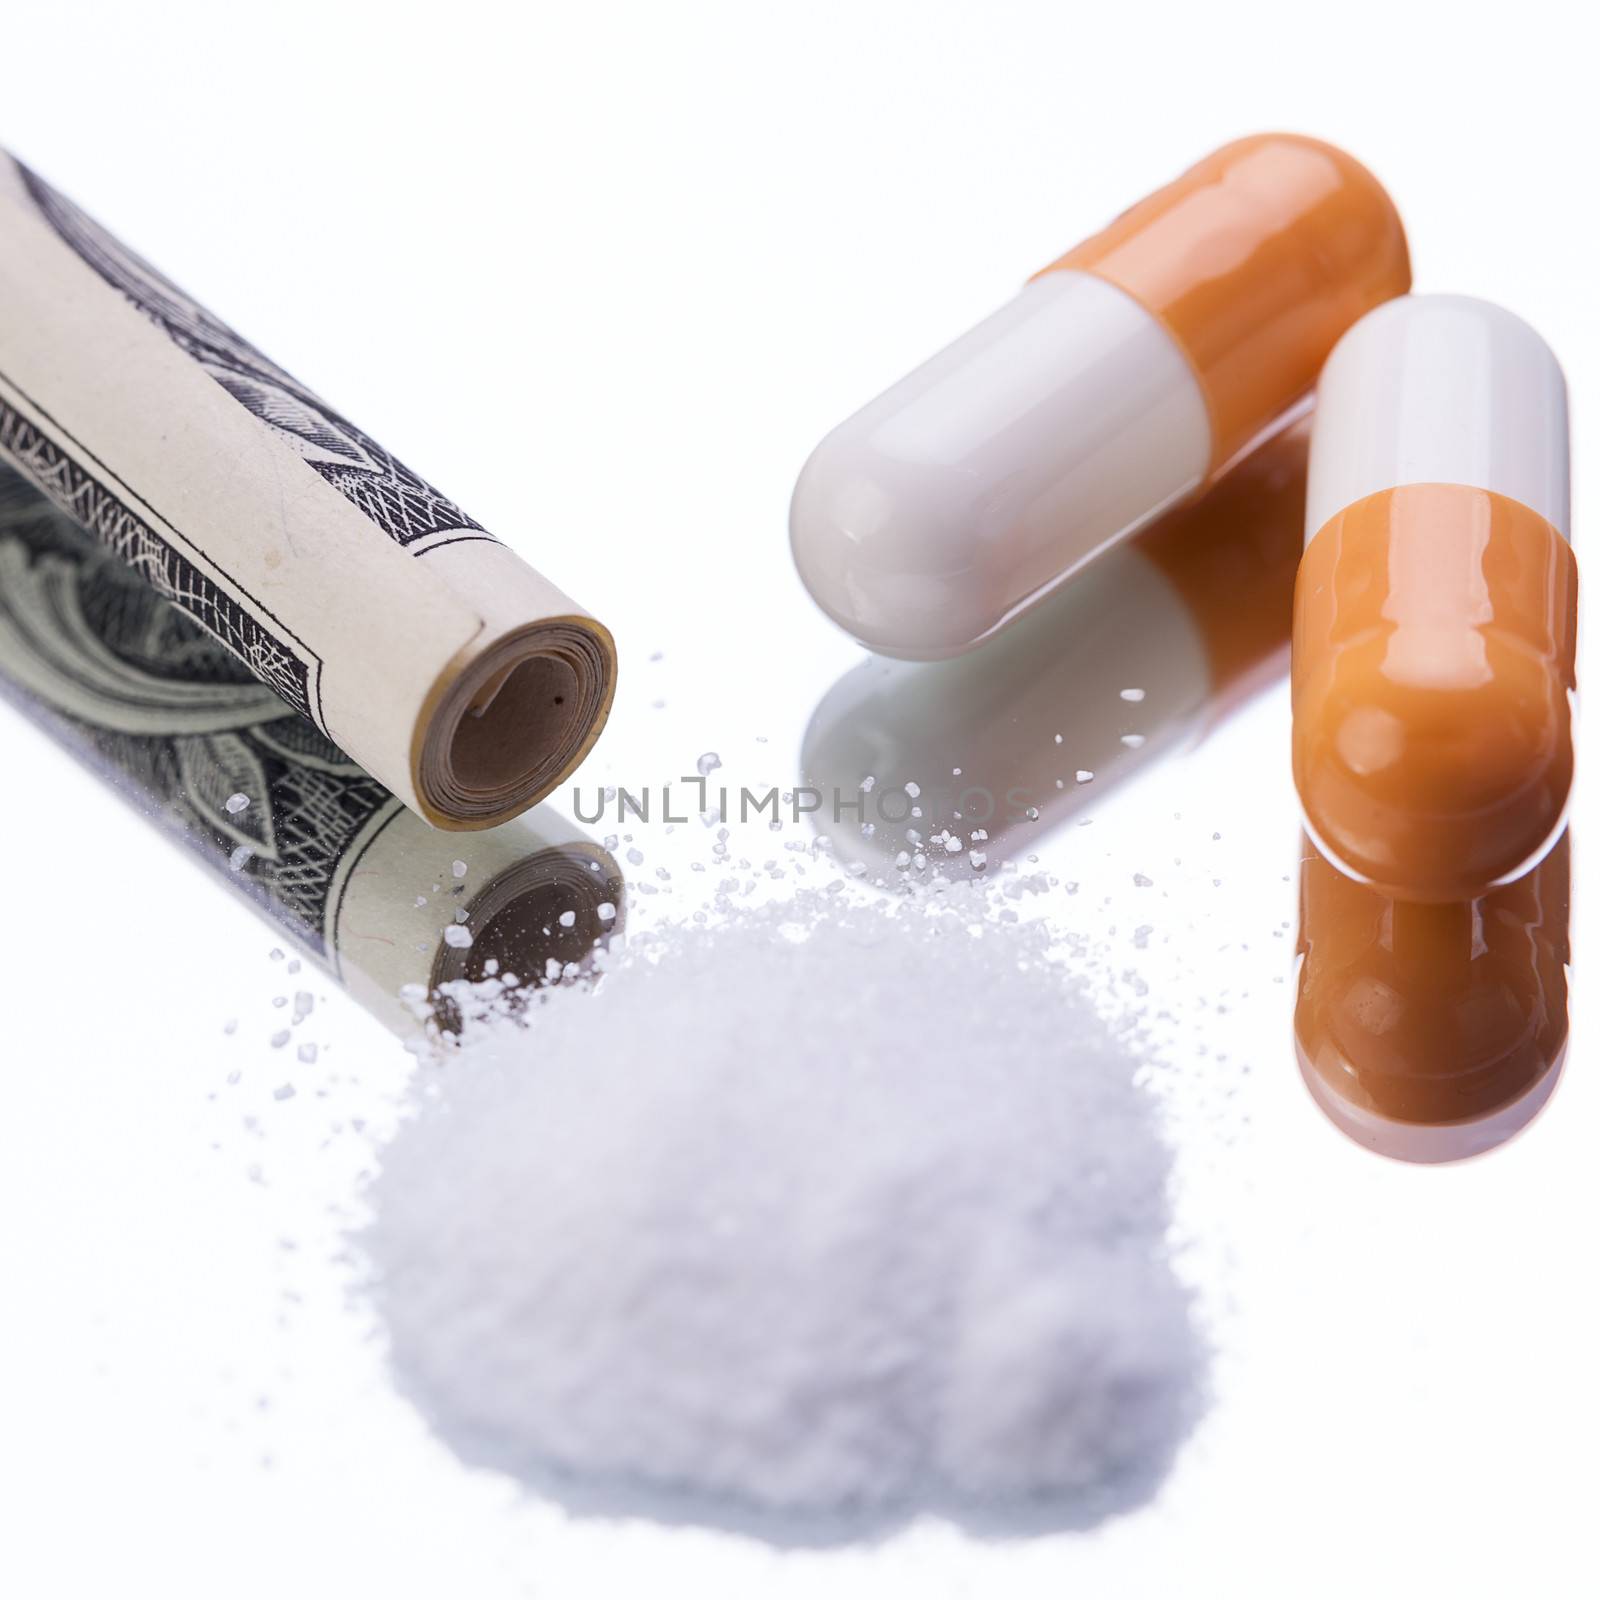 illegal pharmaceutical pills and drugs money on mirror addiction objects